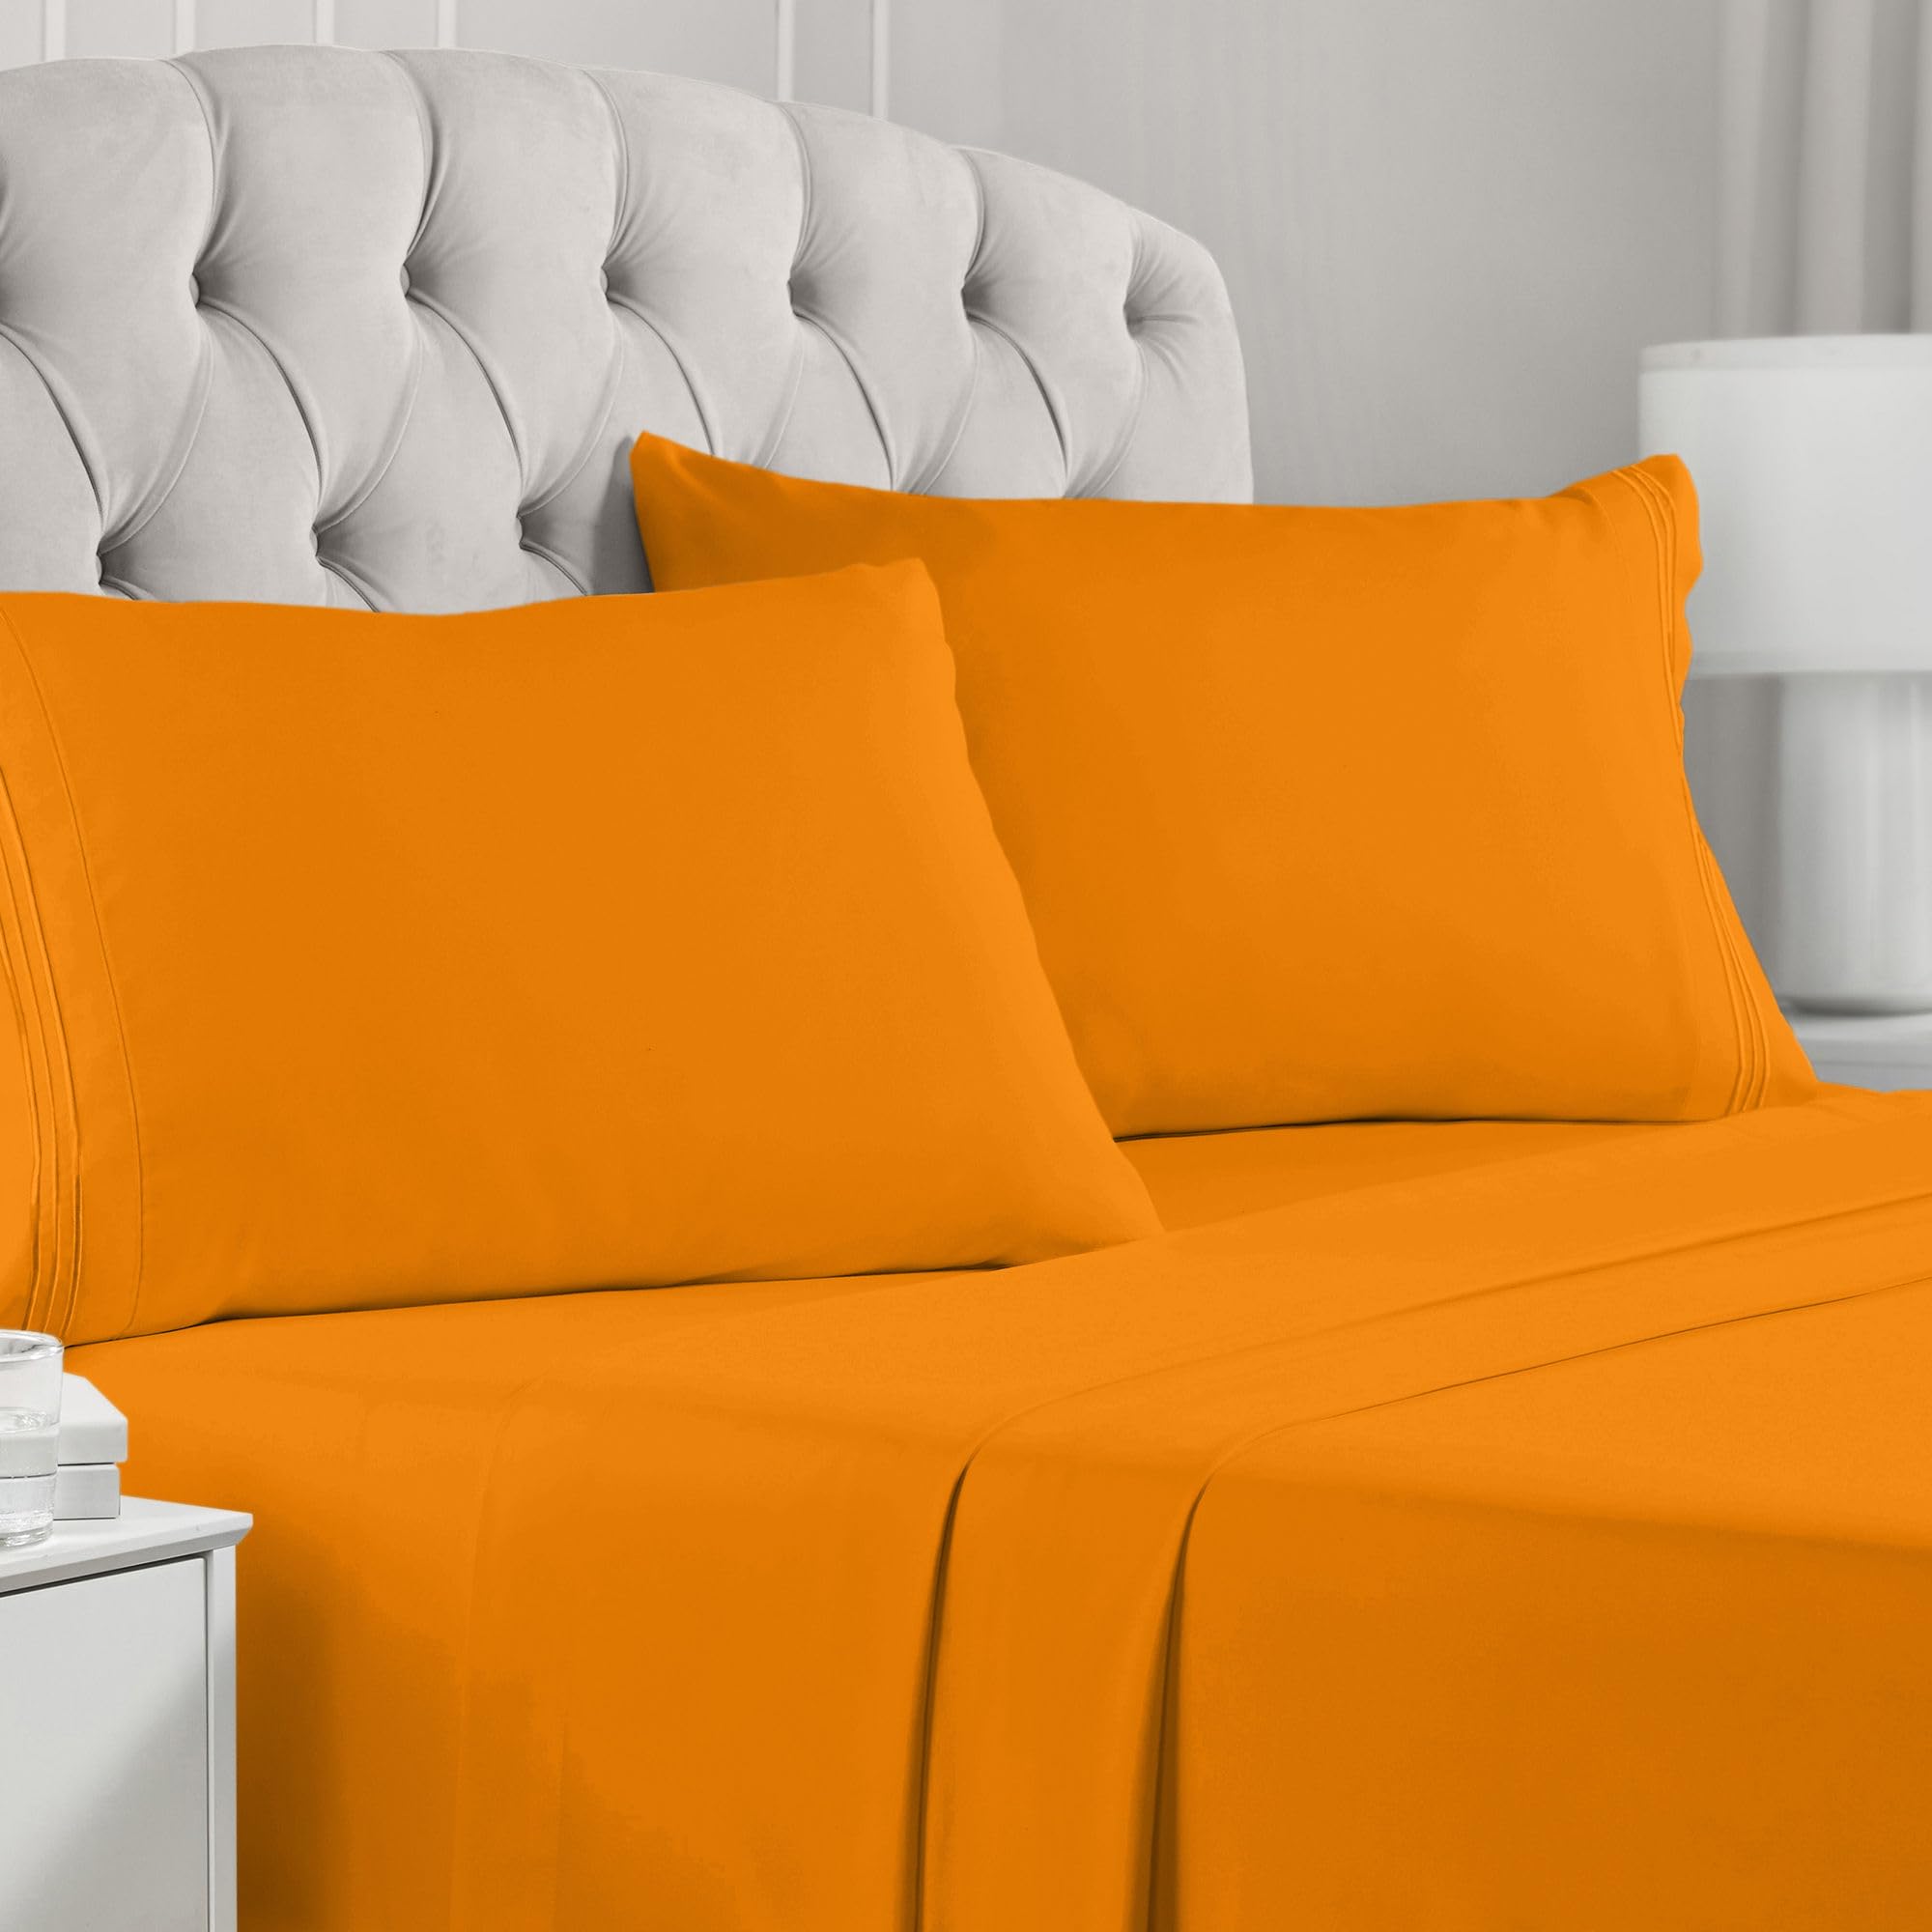 Book Cover Mellanni King Size Sheet Set - Hotel Luxury 1800 Bedding Sheets & Pillowcases - Extra Soft Cooling Bed Sheets - Deep Pocket up to 16 inch Mattress - Easy Care - 4 Piece (King, Persimmon)